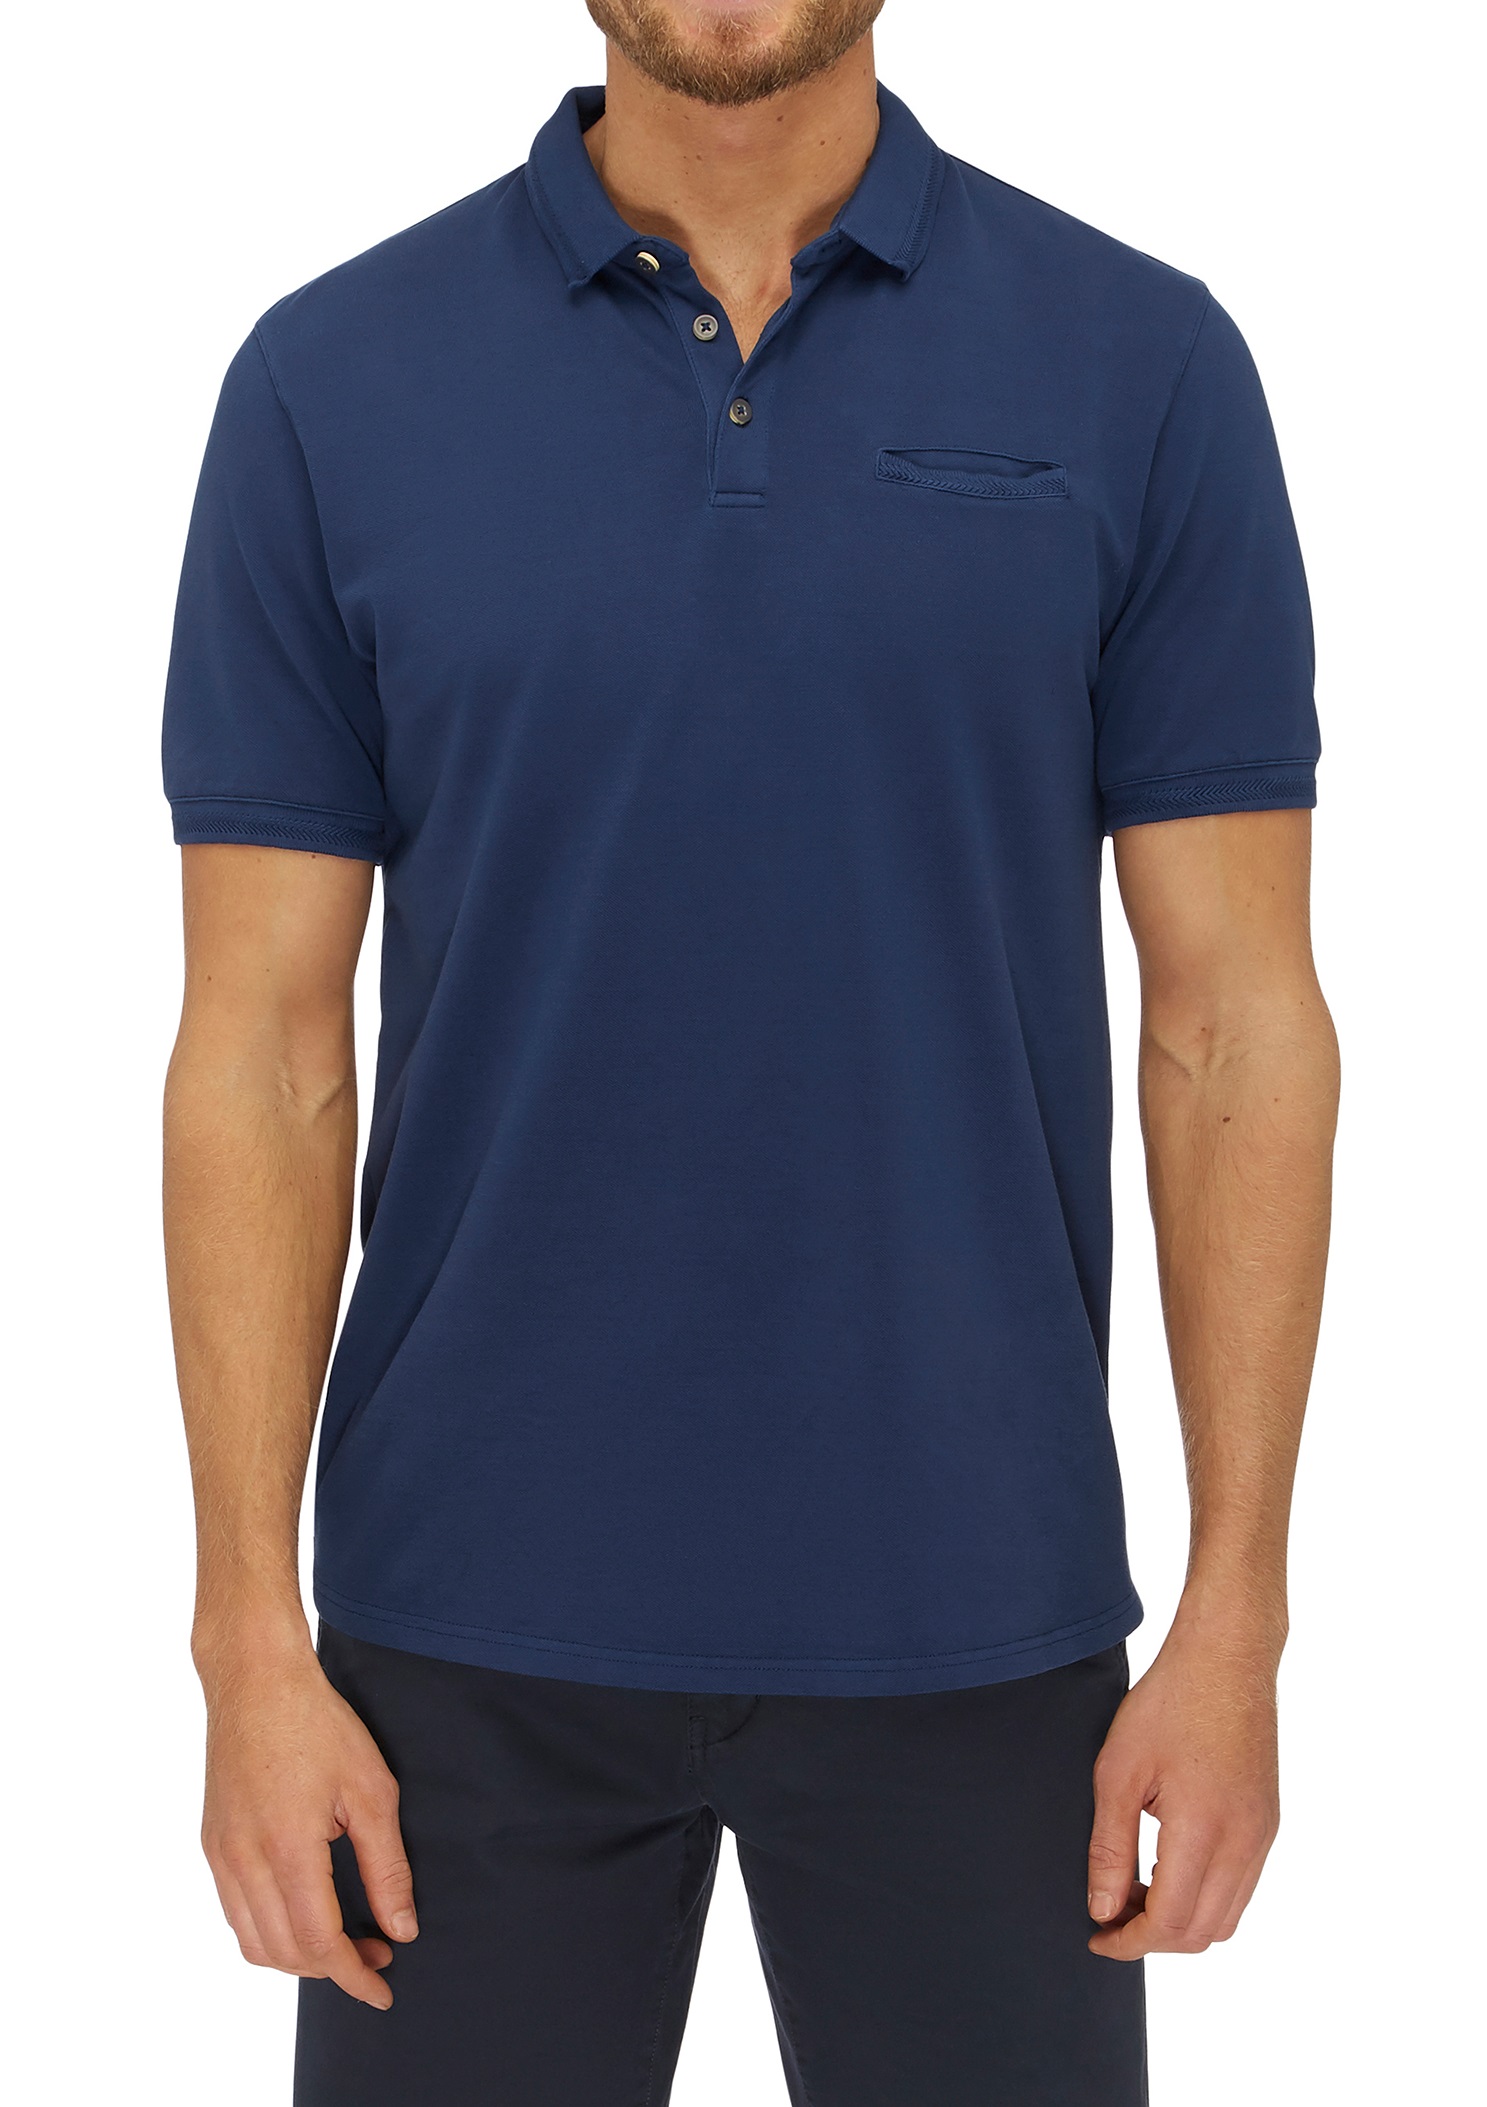 City Club Mens Polo Garment Dyed Pique Stretch Polo Buy Online